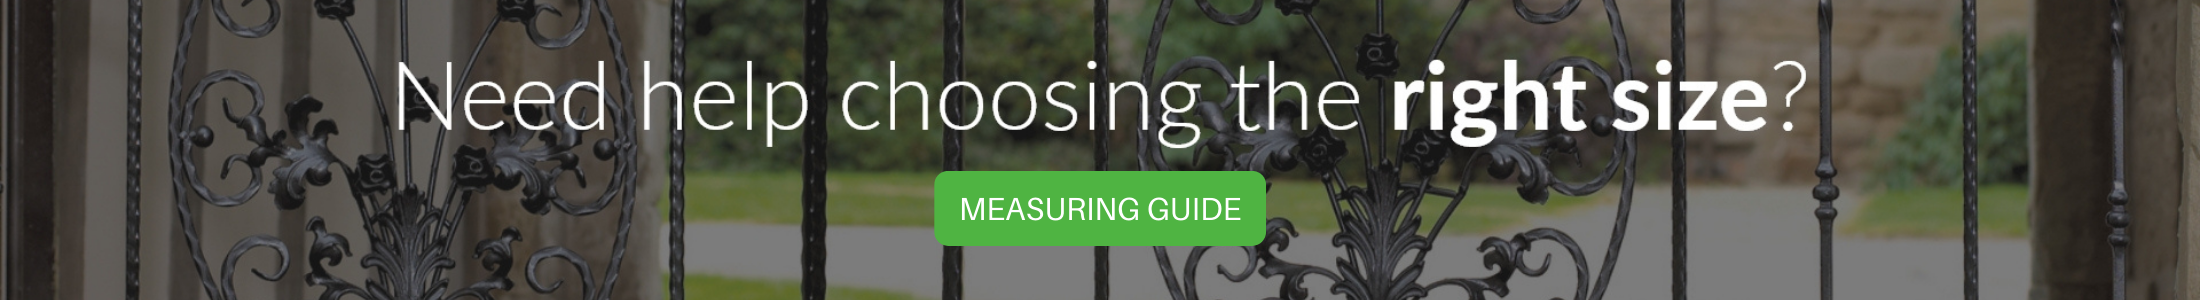 Review the measuring guide if you are confused about ordering sizes